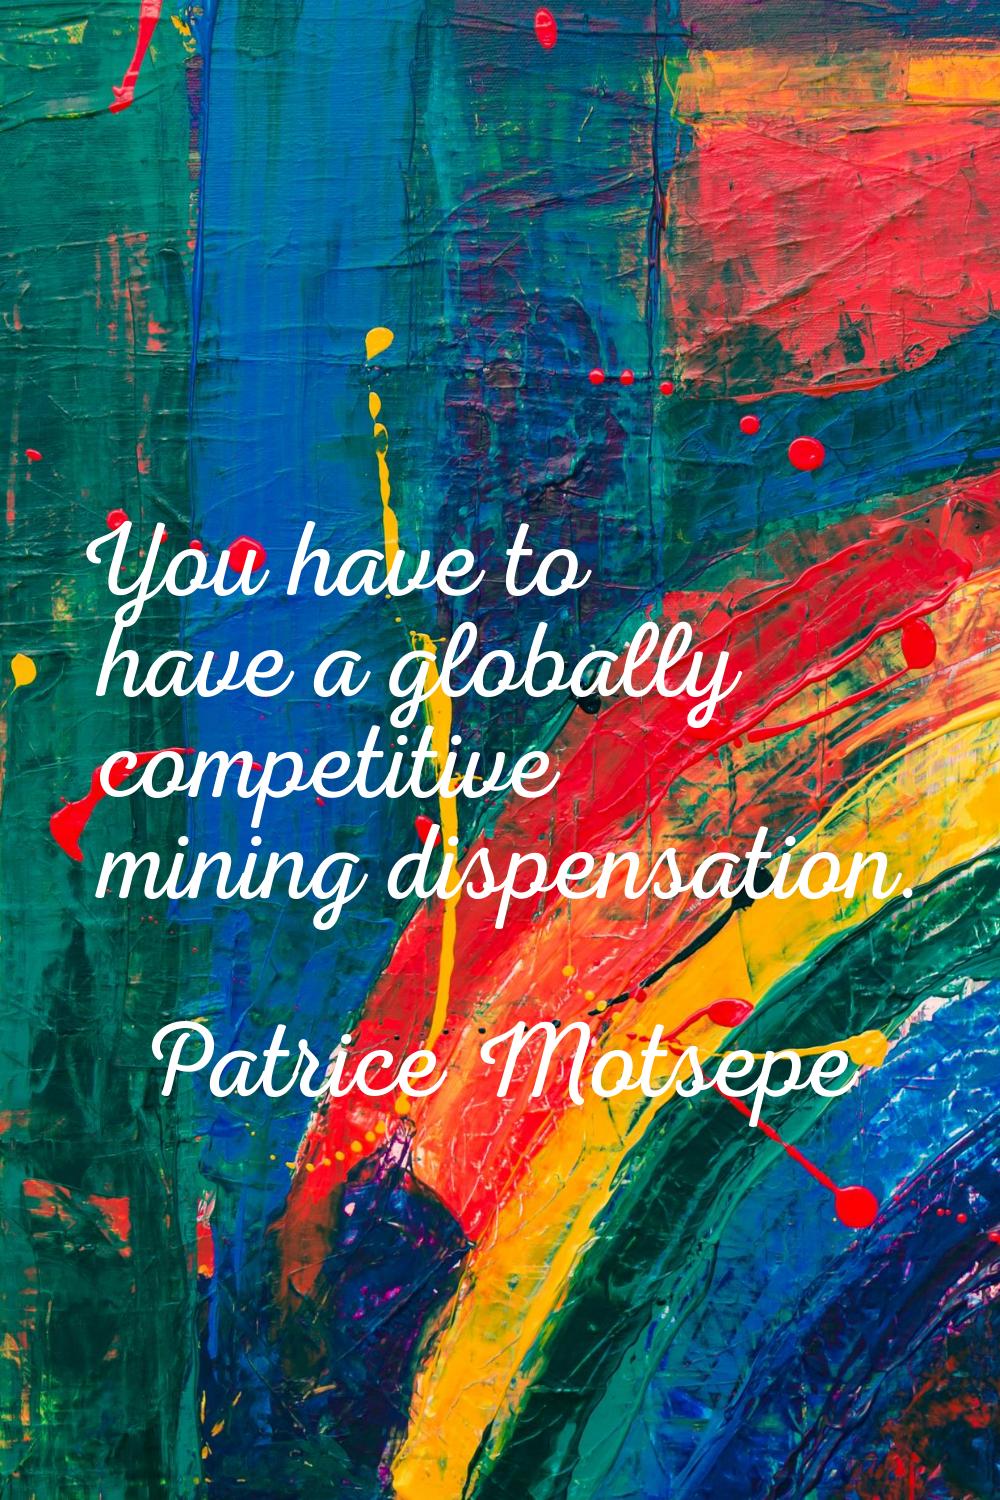 You have to have a globally competitive mining dispensation.